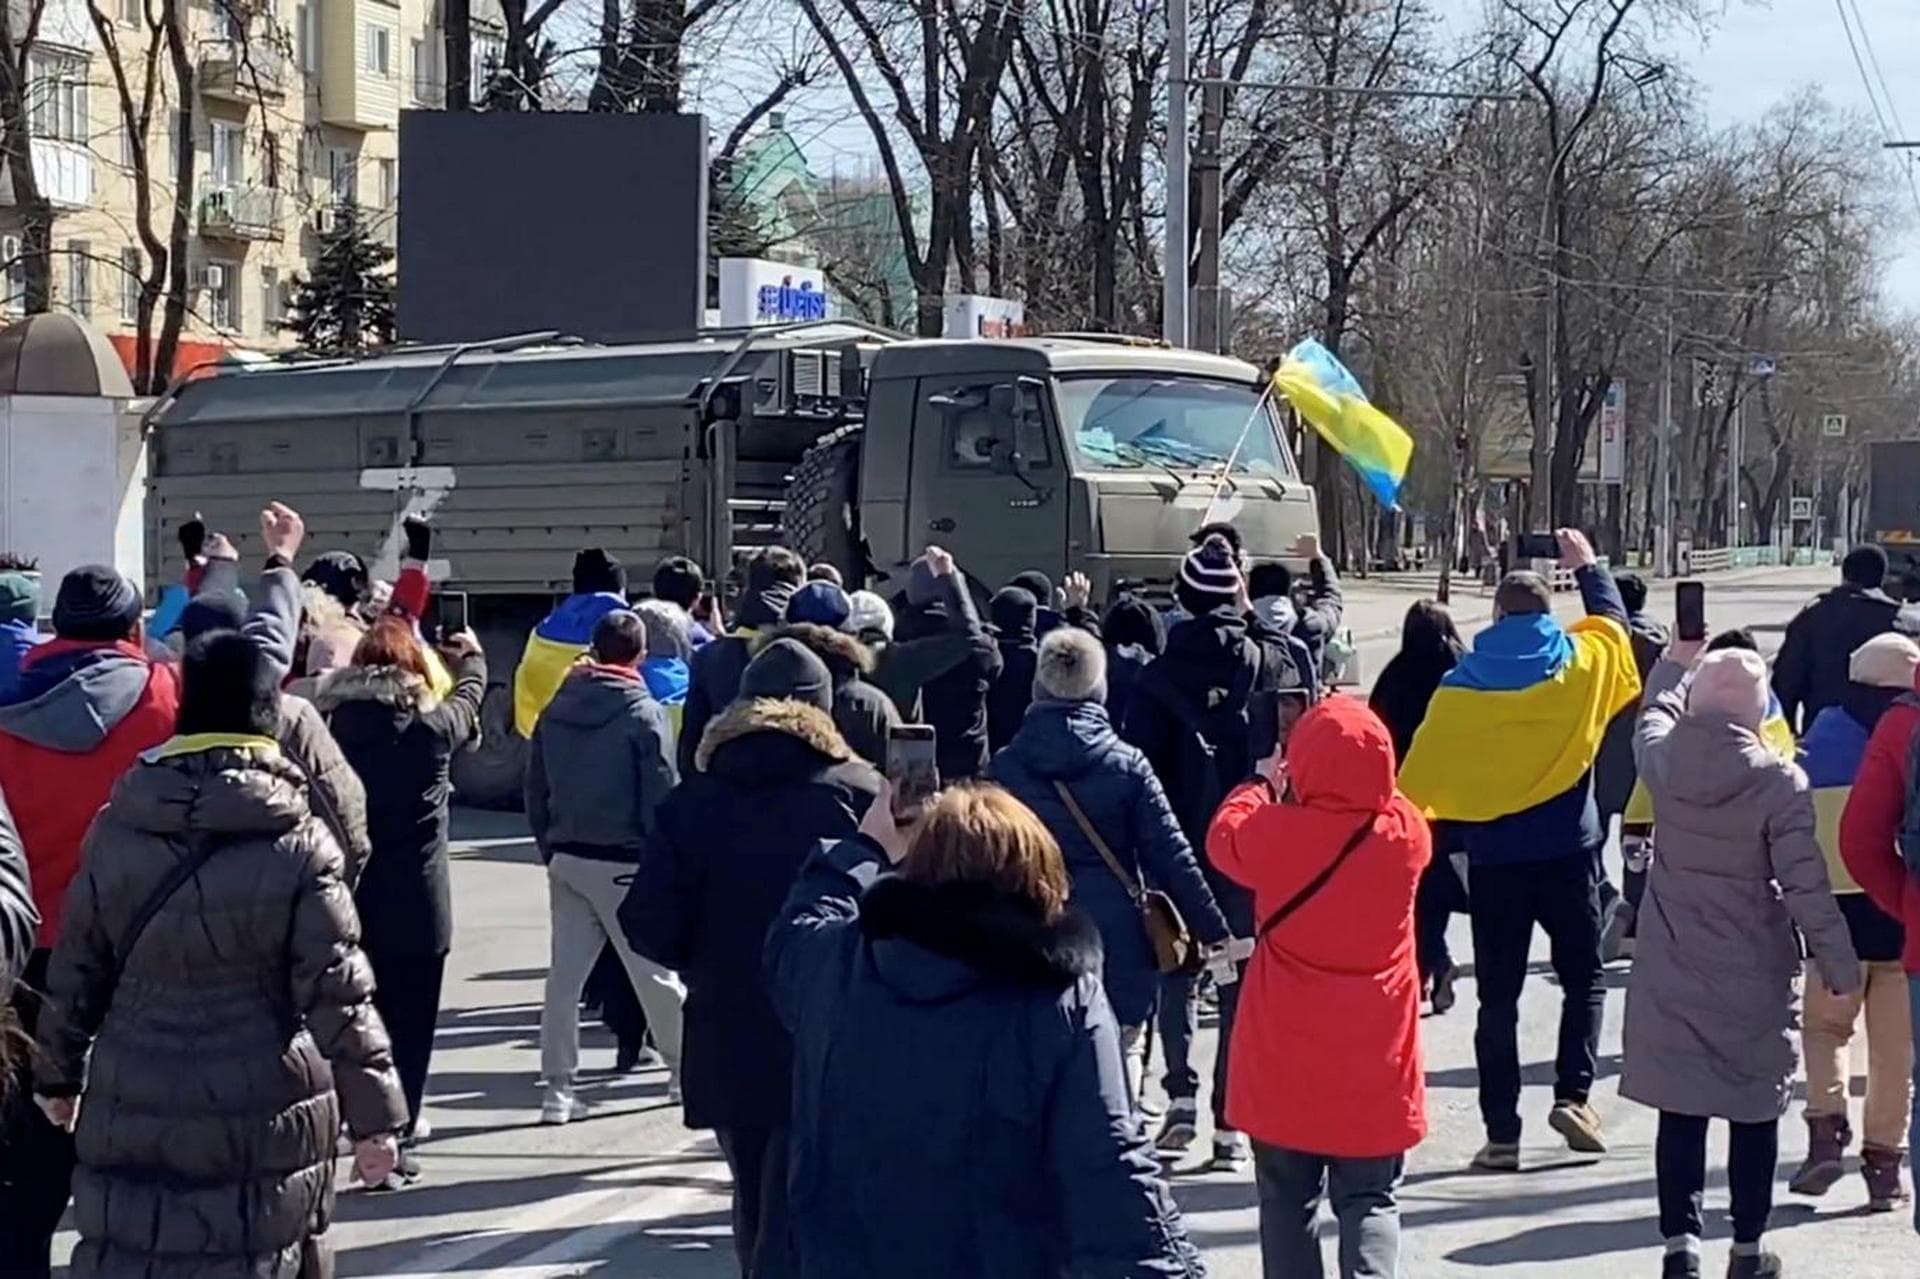 Demonstrators, some displaying Ukrainian flags, chant 'go home' while walking towards retreating Russian military vehicles at a pro-Ukraine rally in Kherson